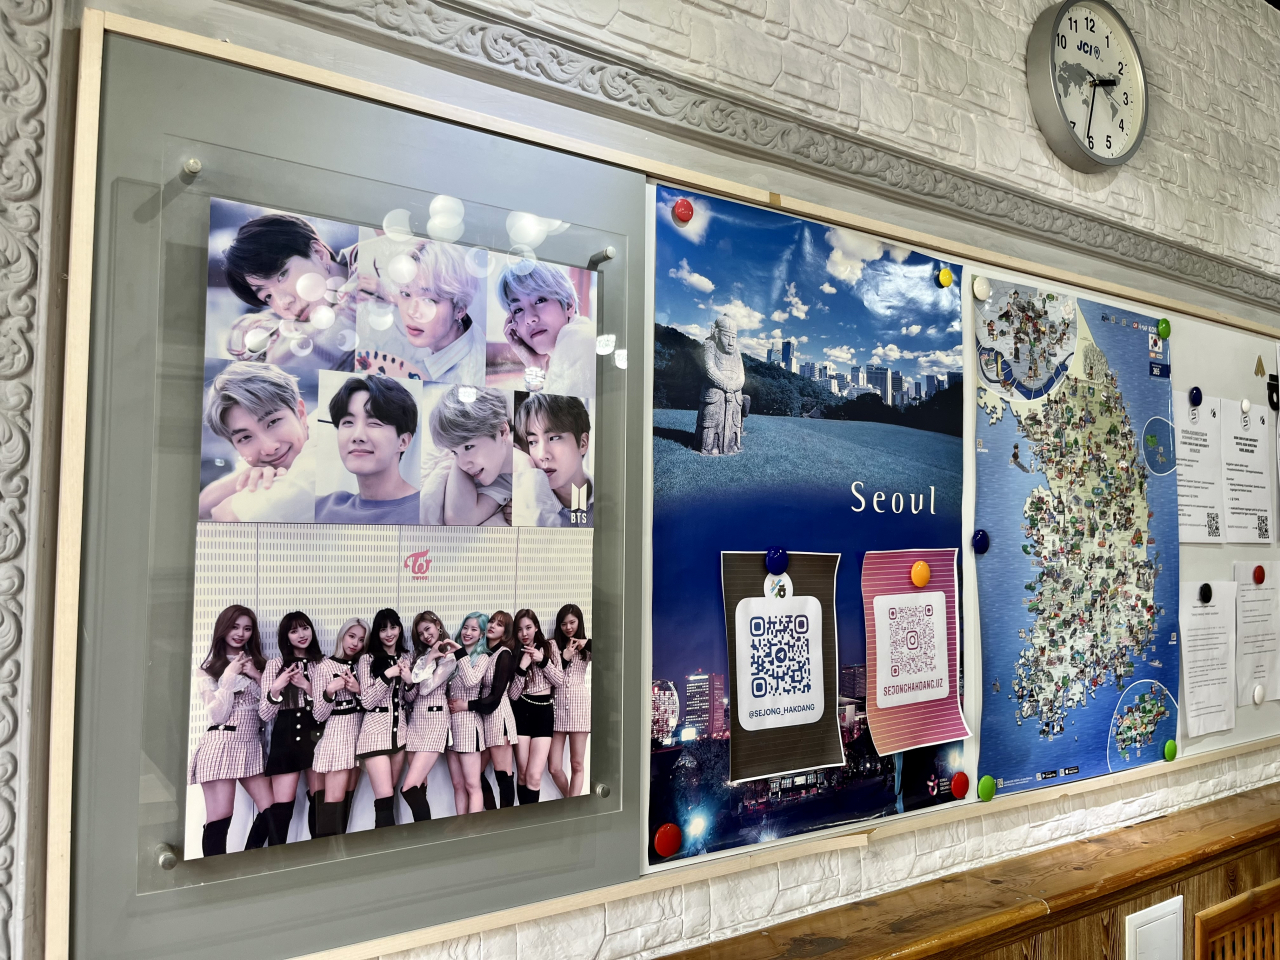 Photographs of K-pop artists are posted on the wall of the classroom at the King Sejong Institute in Tashkent. (Kim Arin/The Korea Herald)